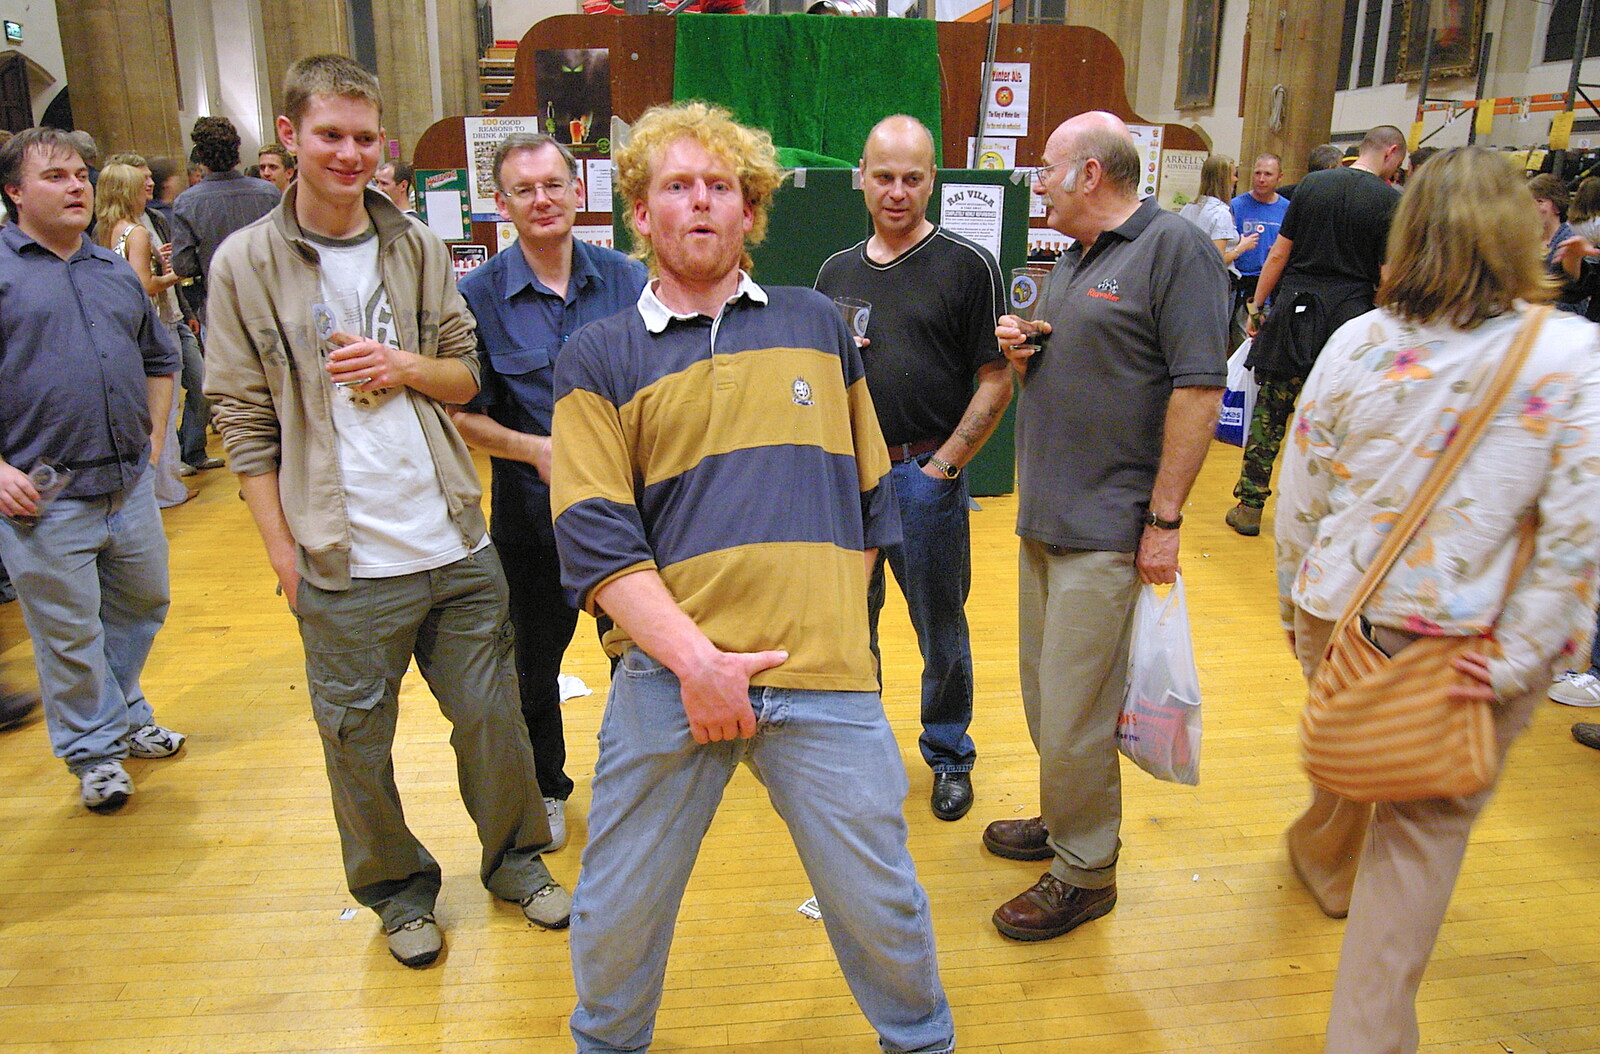 Wavy does a Michael Jackson-style crotch-grab from The 28th Norwich Beer Festival, St. Andrew's Hall, Norwich - 26th October 2005